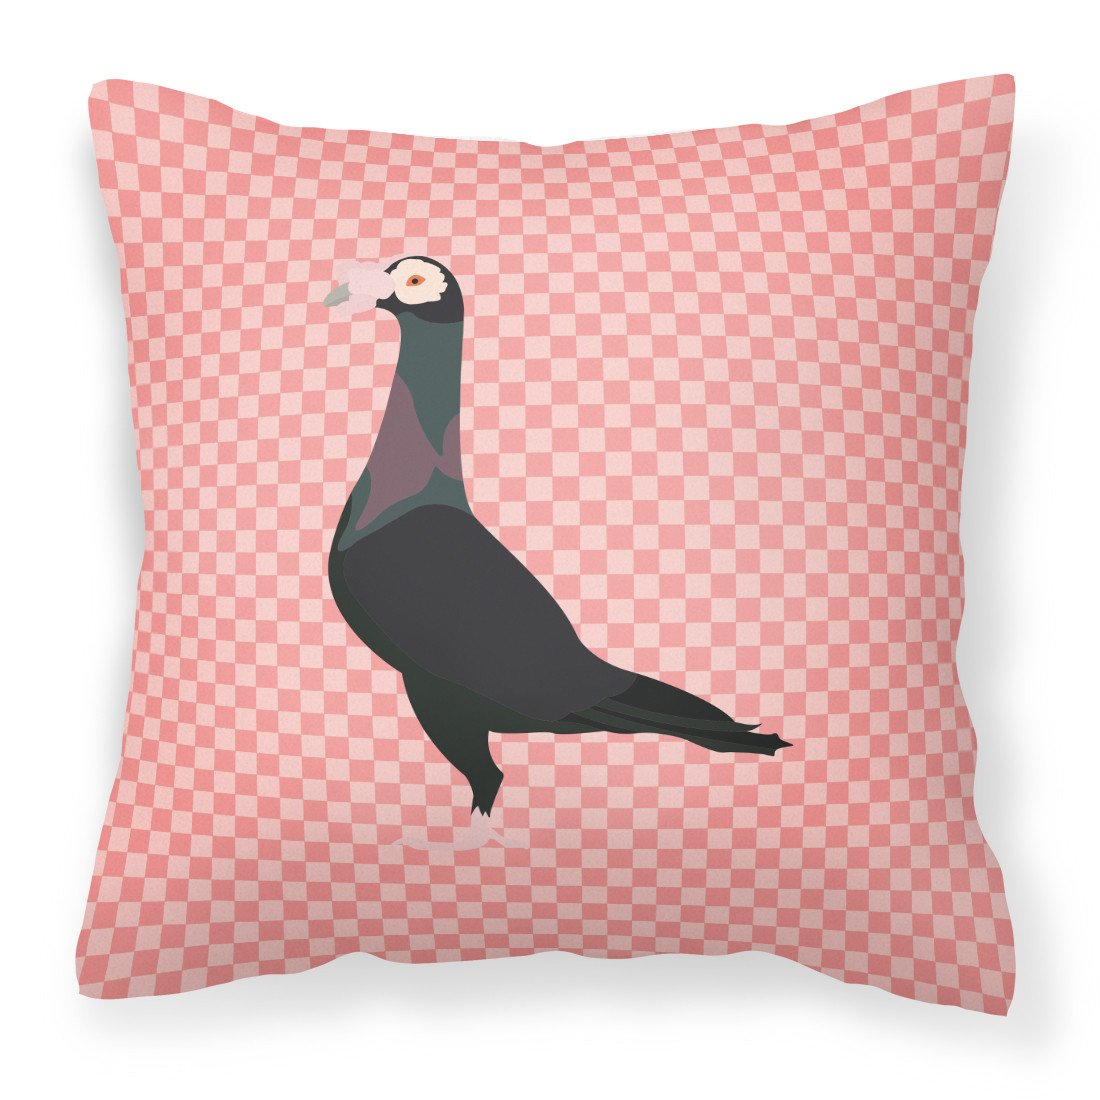 English Carrier Pigeon Pink Check Fabric Decorative Pillow BB7945PW1818 by Caroline's Treasures